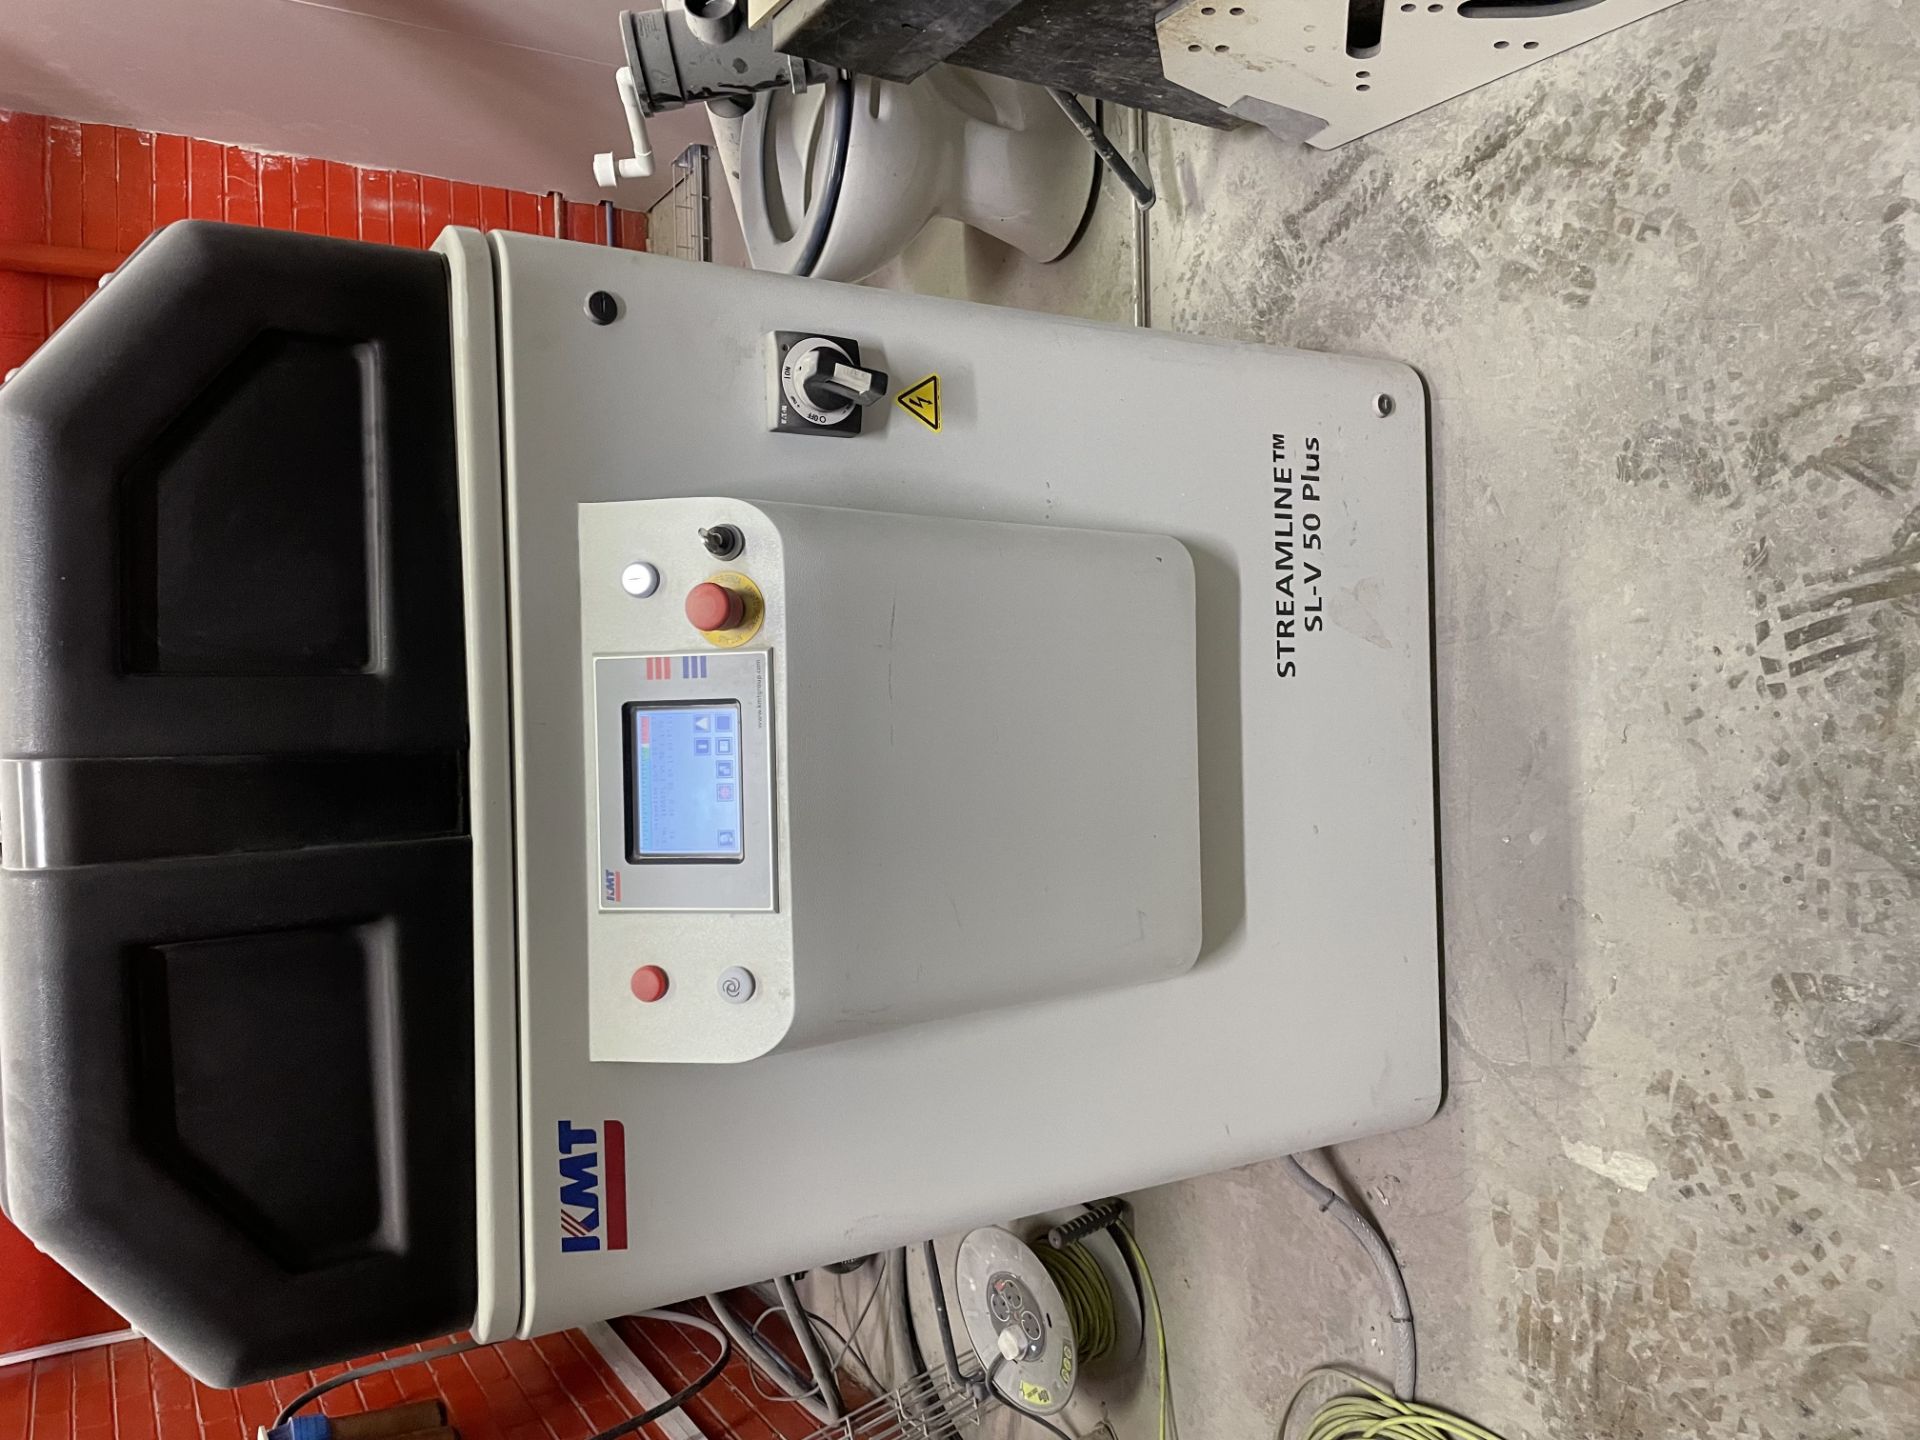 2019 Waterjet Sweden NCT30 waterjet cutting machine, comes with MARK compressor M5M.5D and KMT pump - Image 4 of 11